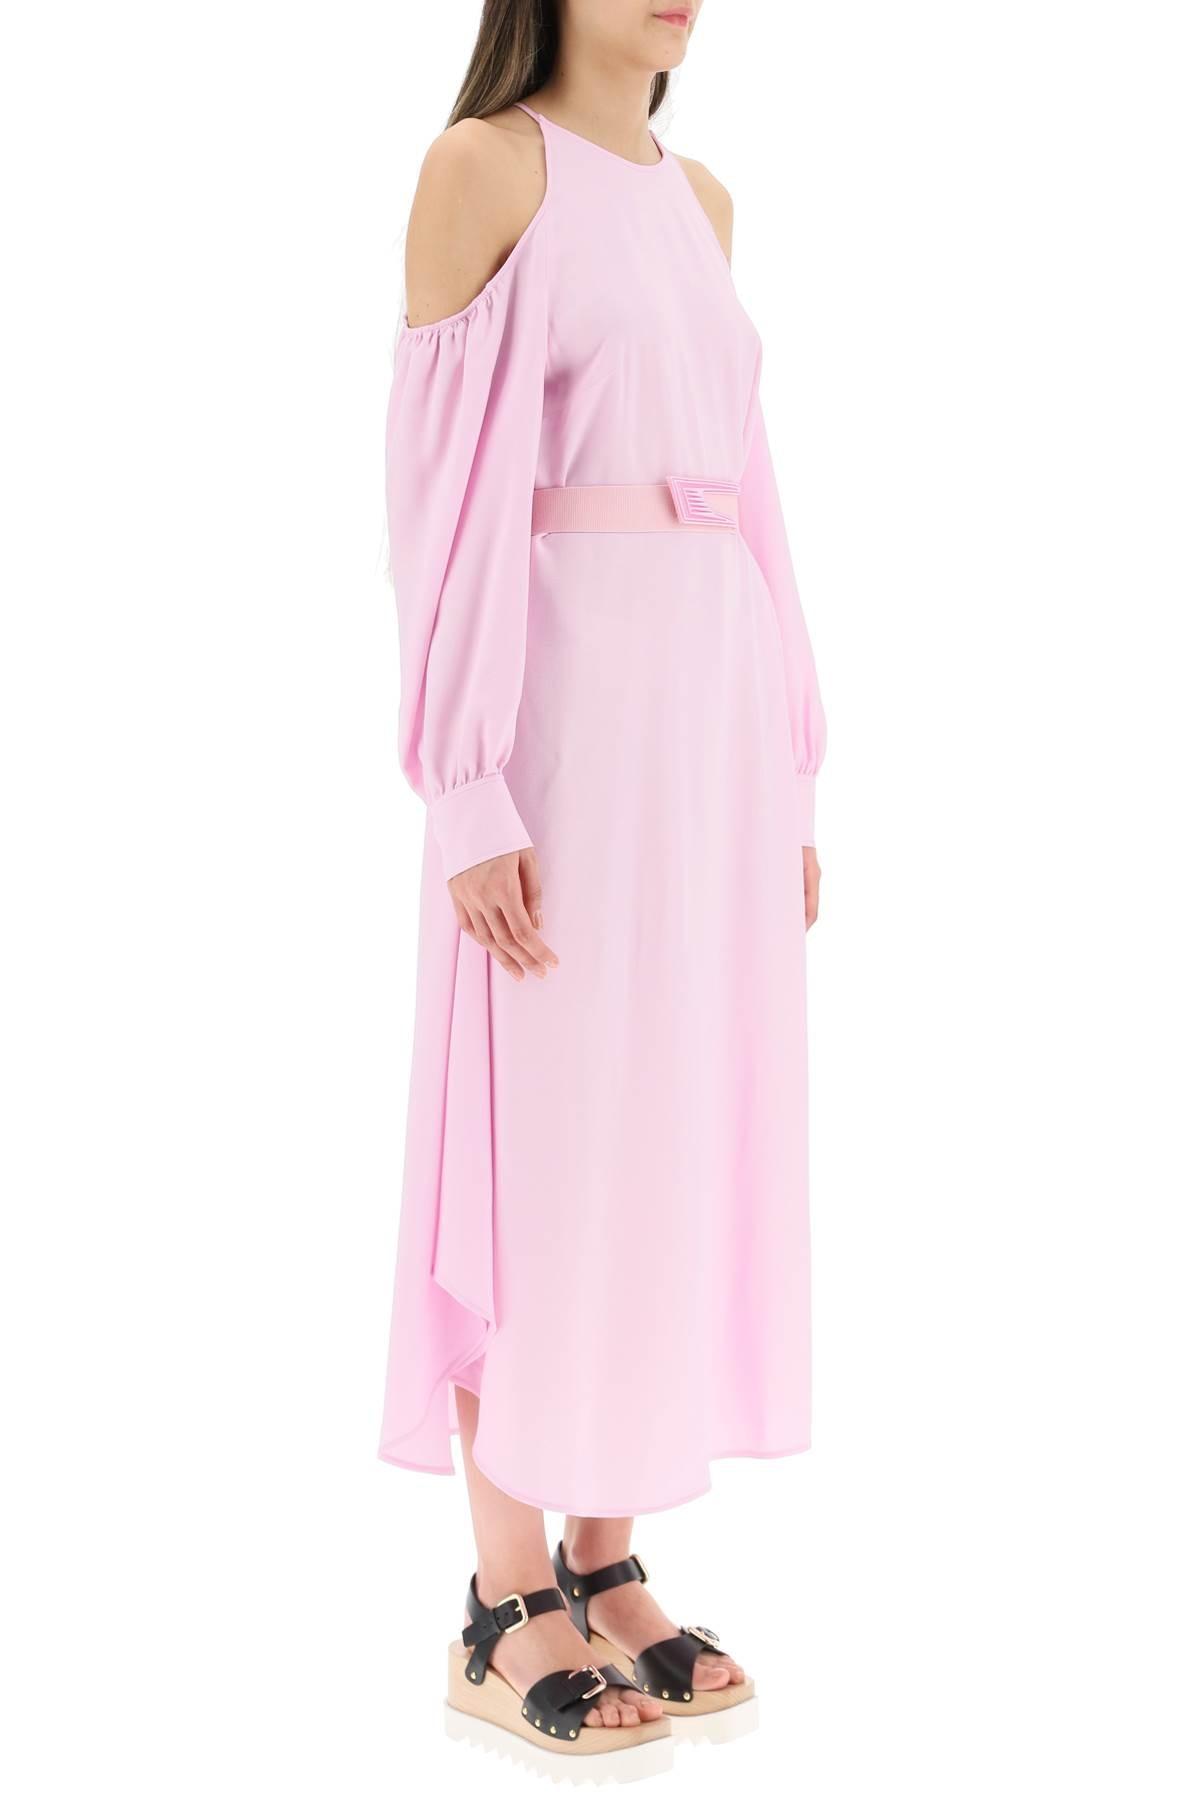 Womens Dresses Stella McCartney Dresses Stella McCartney Synthetic Maxi Dress With Belt in Pink Save 43% 